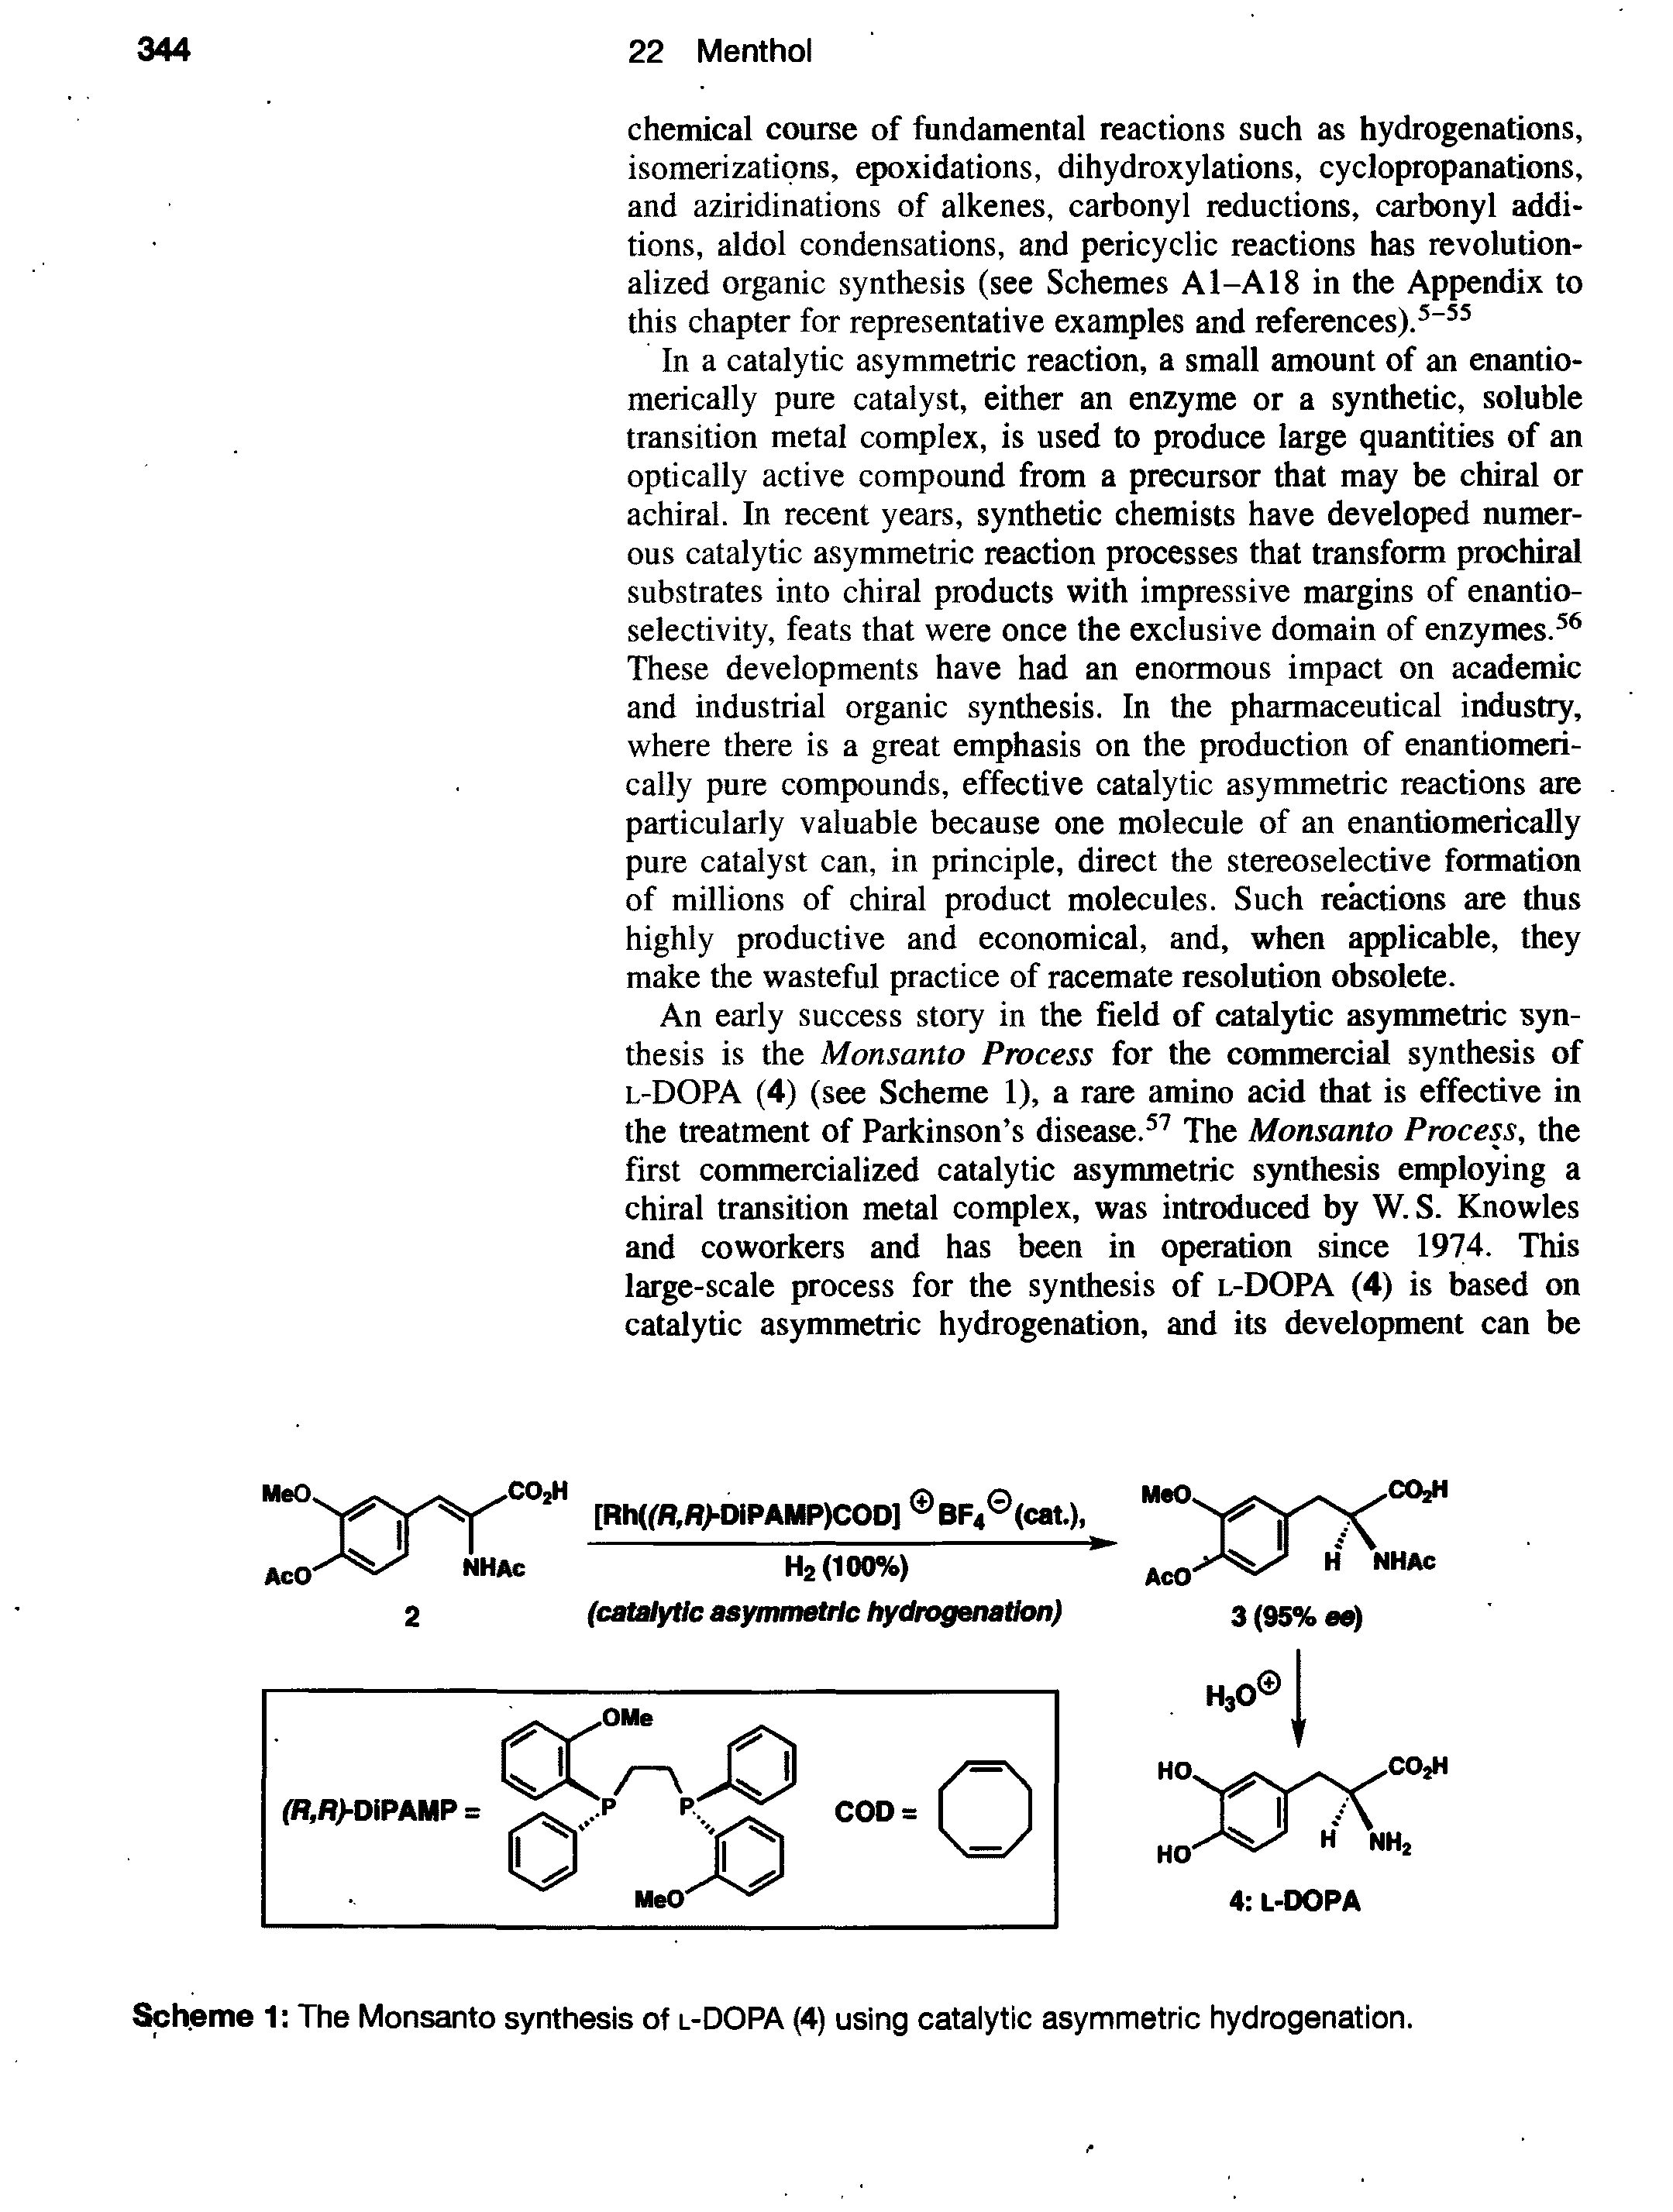 Scheme 1 The Monsanto synthesis of l-DOPA (4) using catalytic asymmetric hydrogenation.